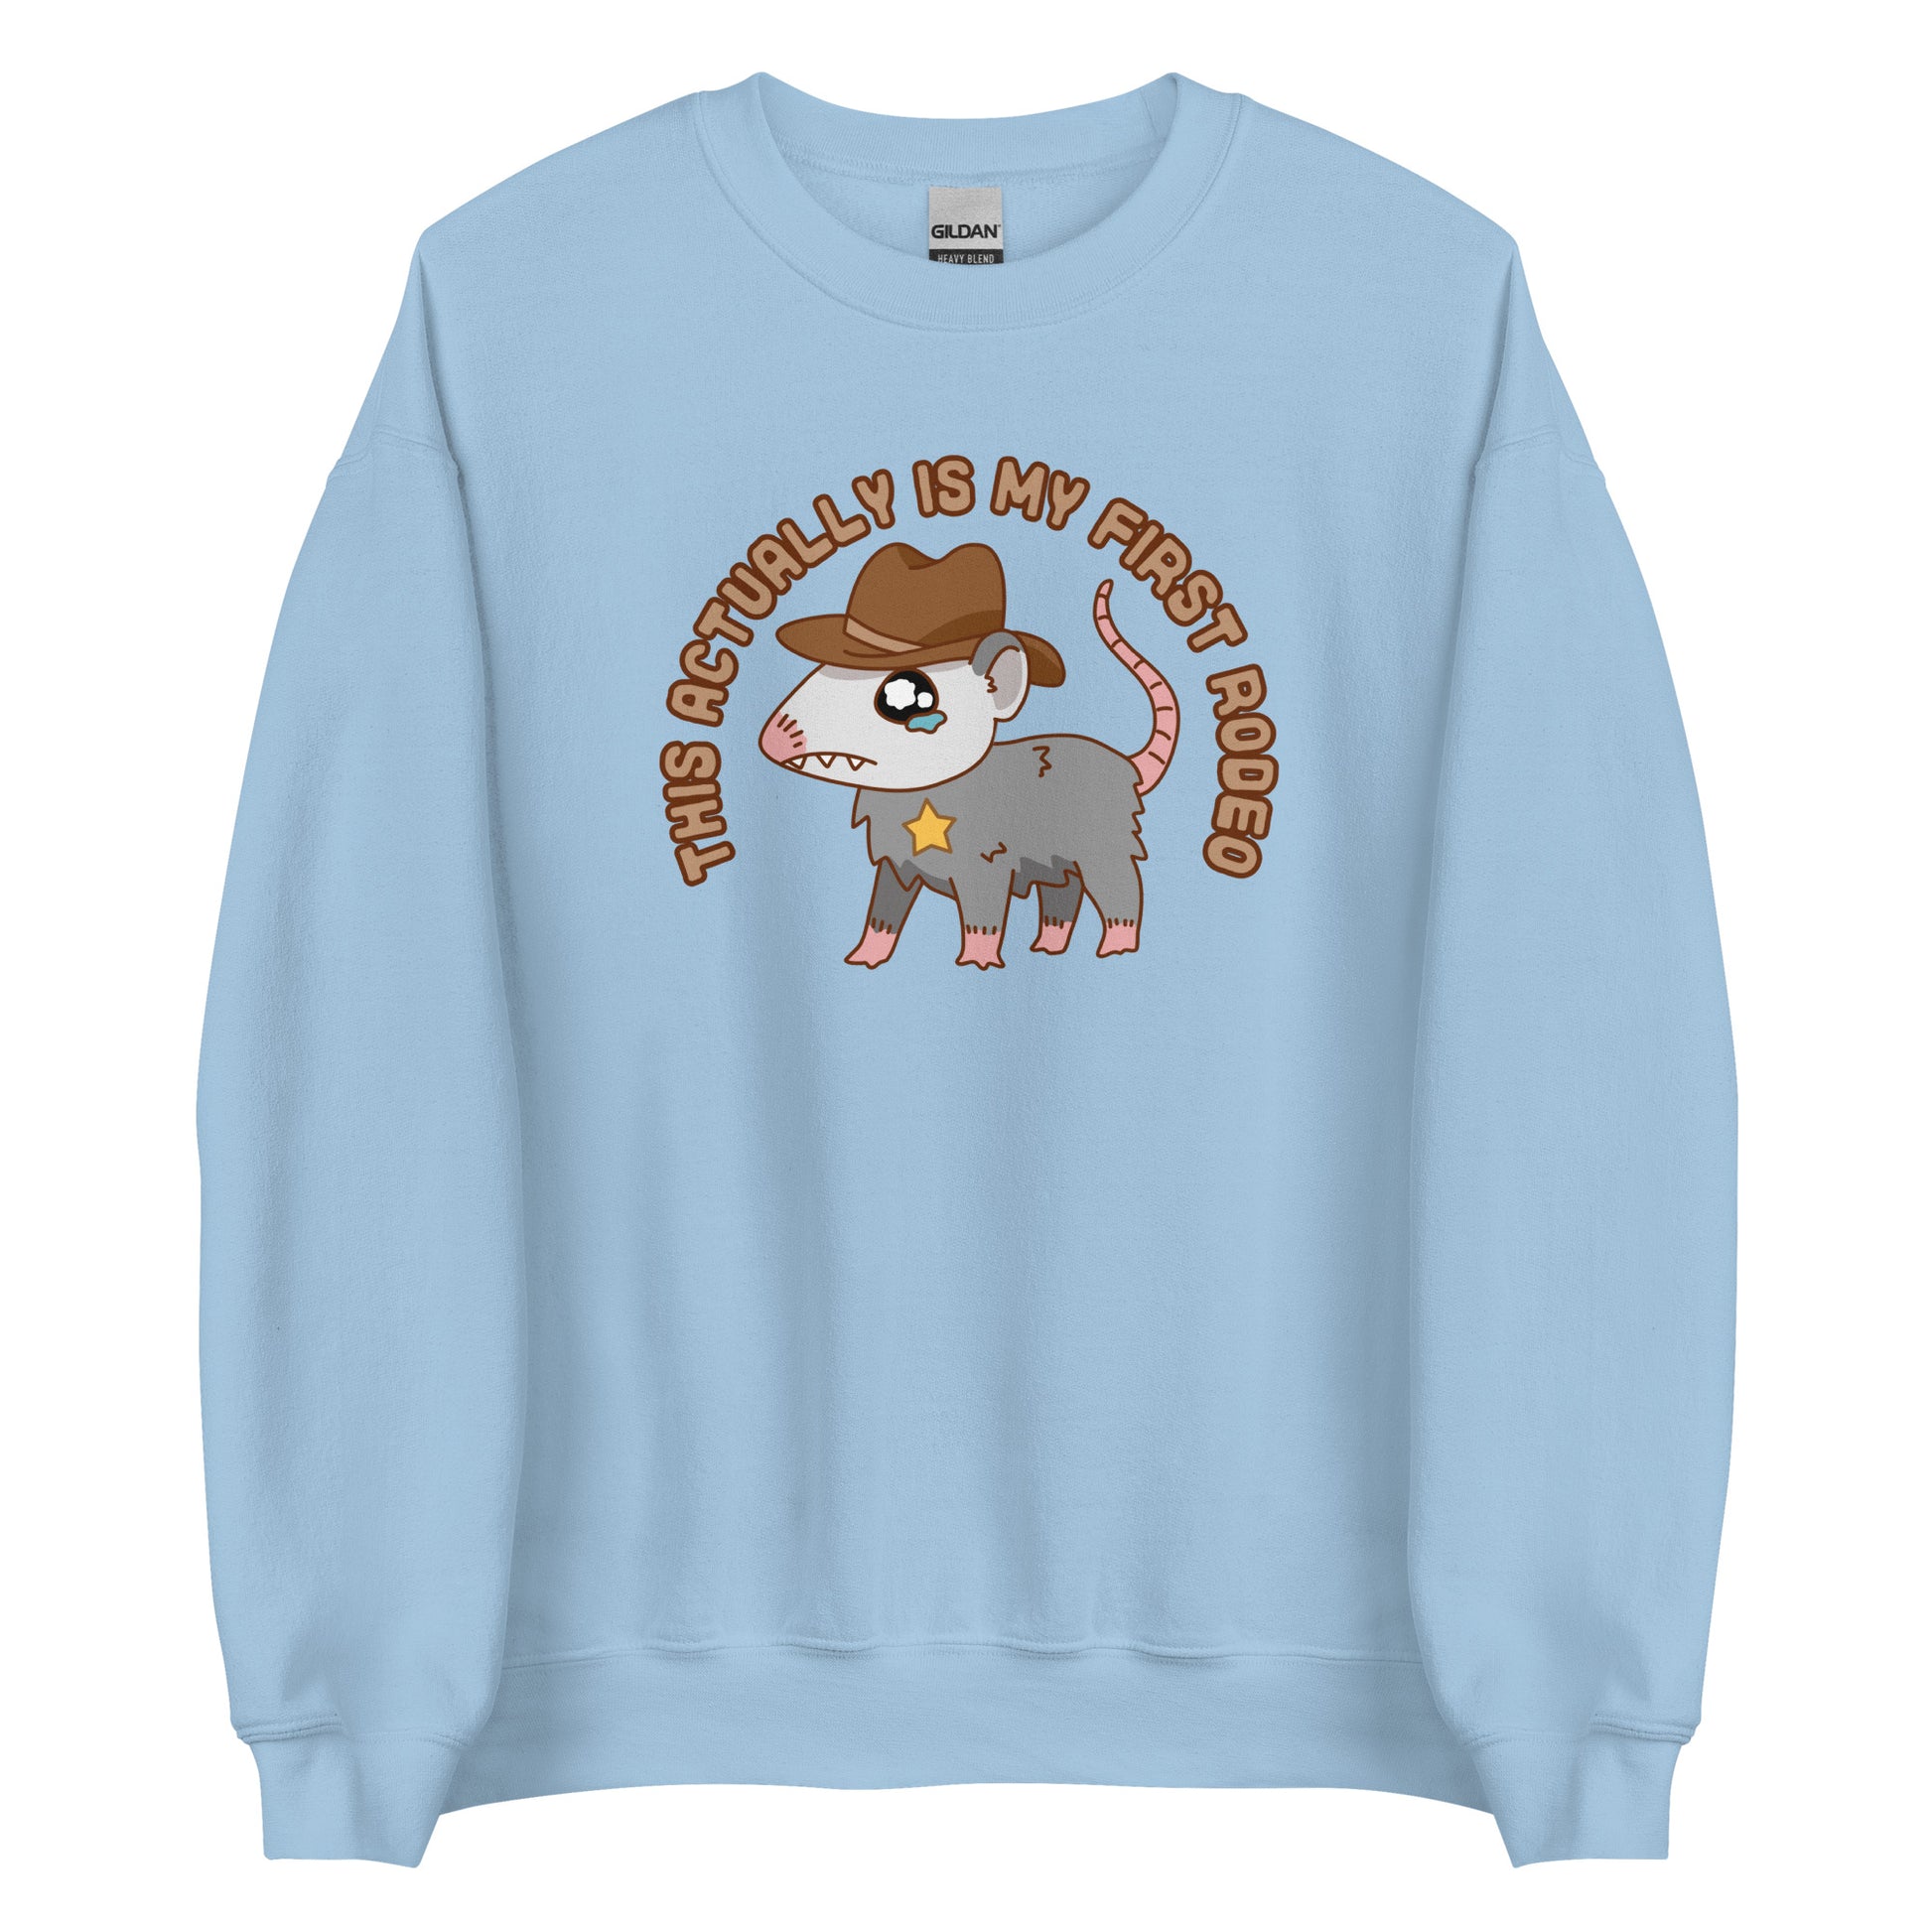 A light blue crewneck sweatshirt featuring an illustration of a cute and nervous possum wearing a cowboy hat and sherrif's star badge. Text above the possum in an arc reads "this actually is my first rodeo".